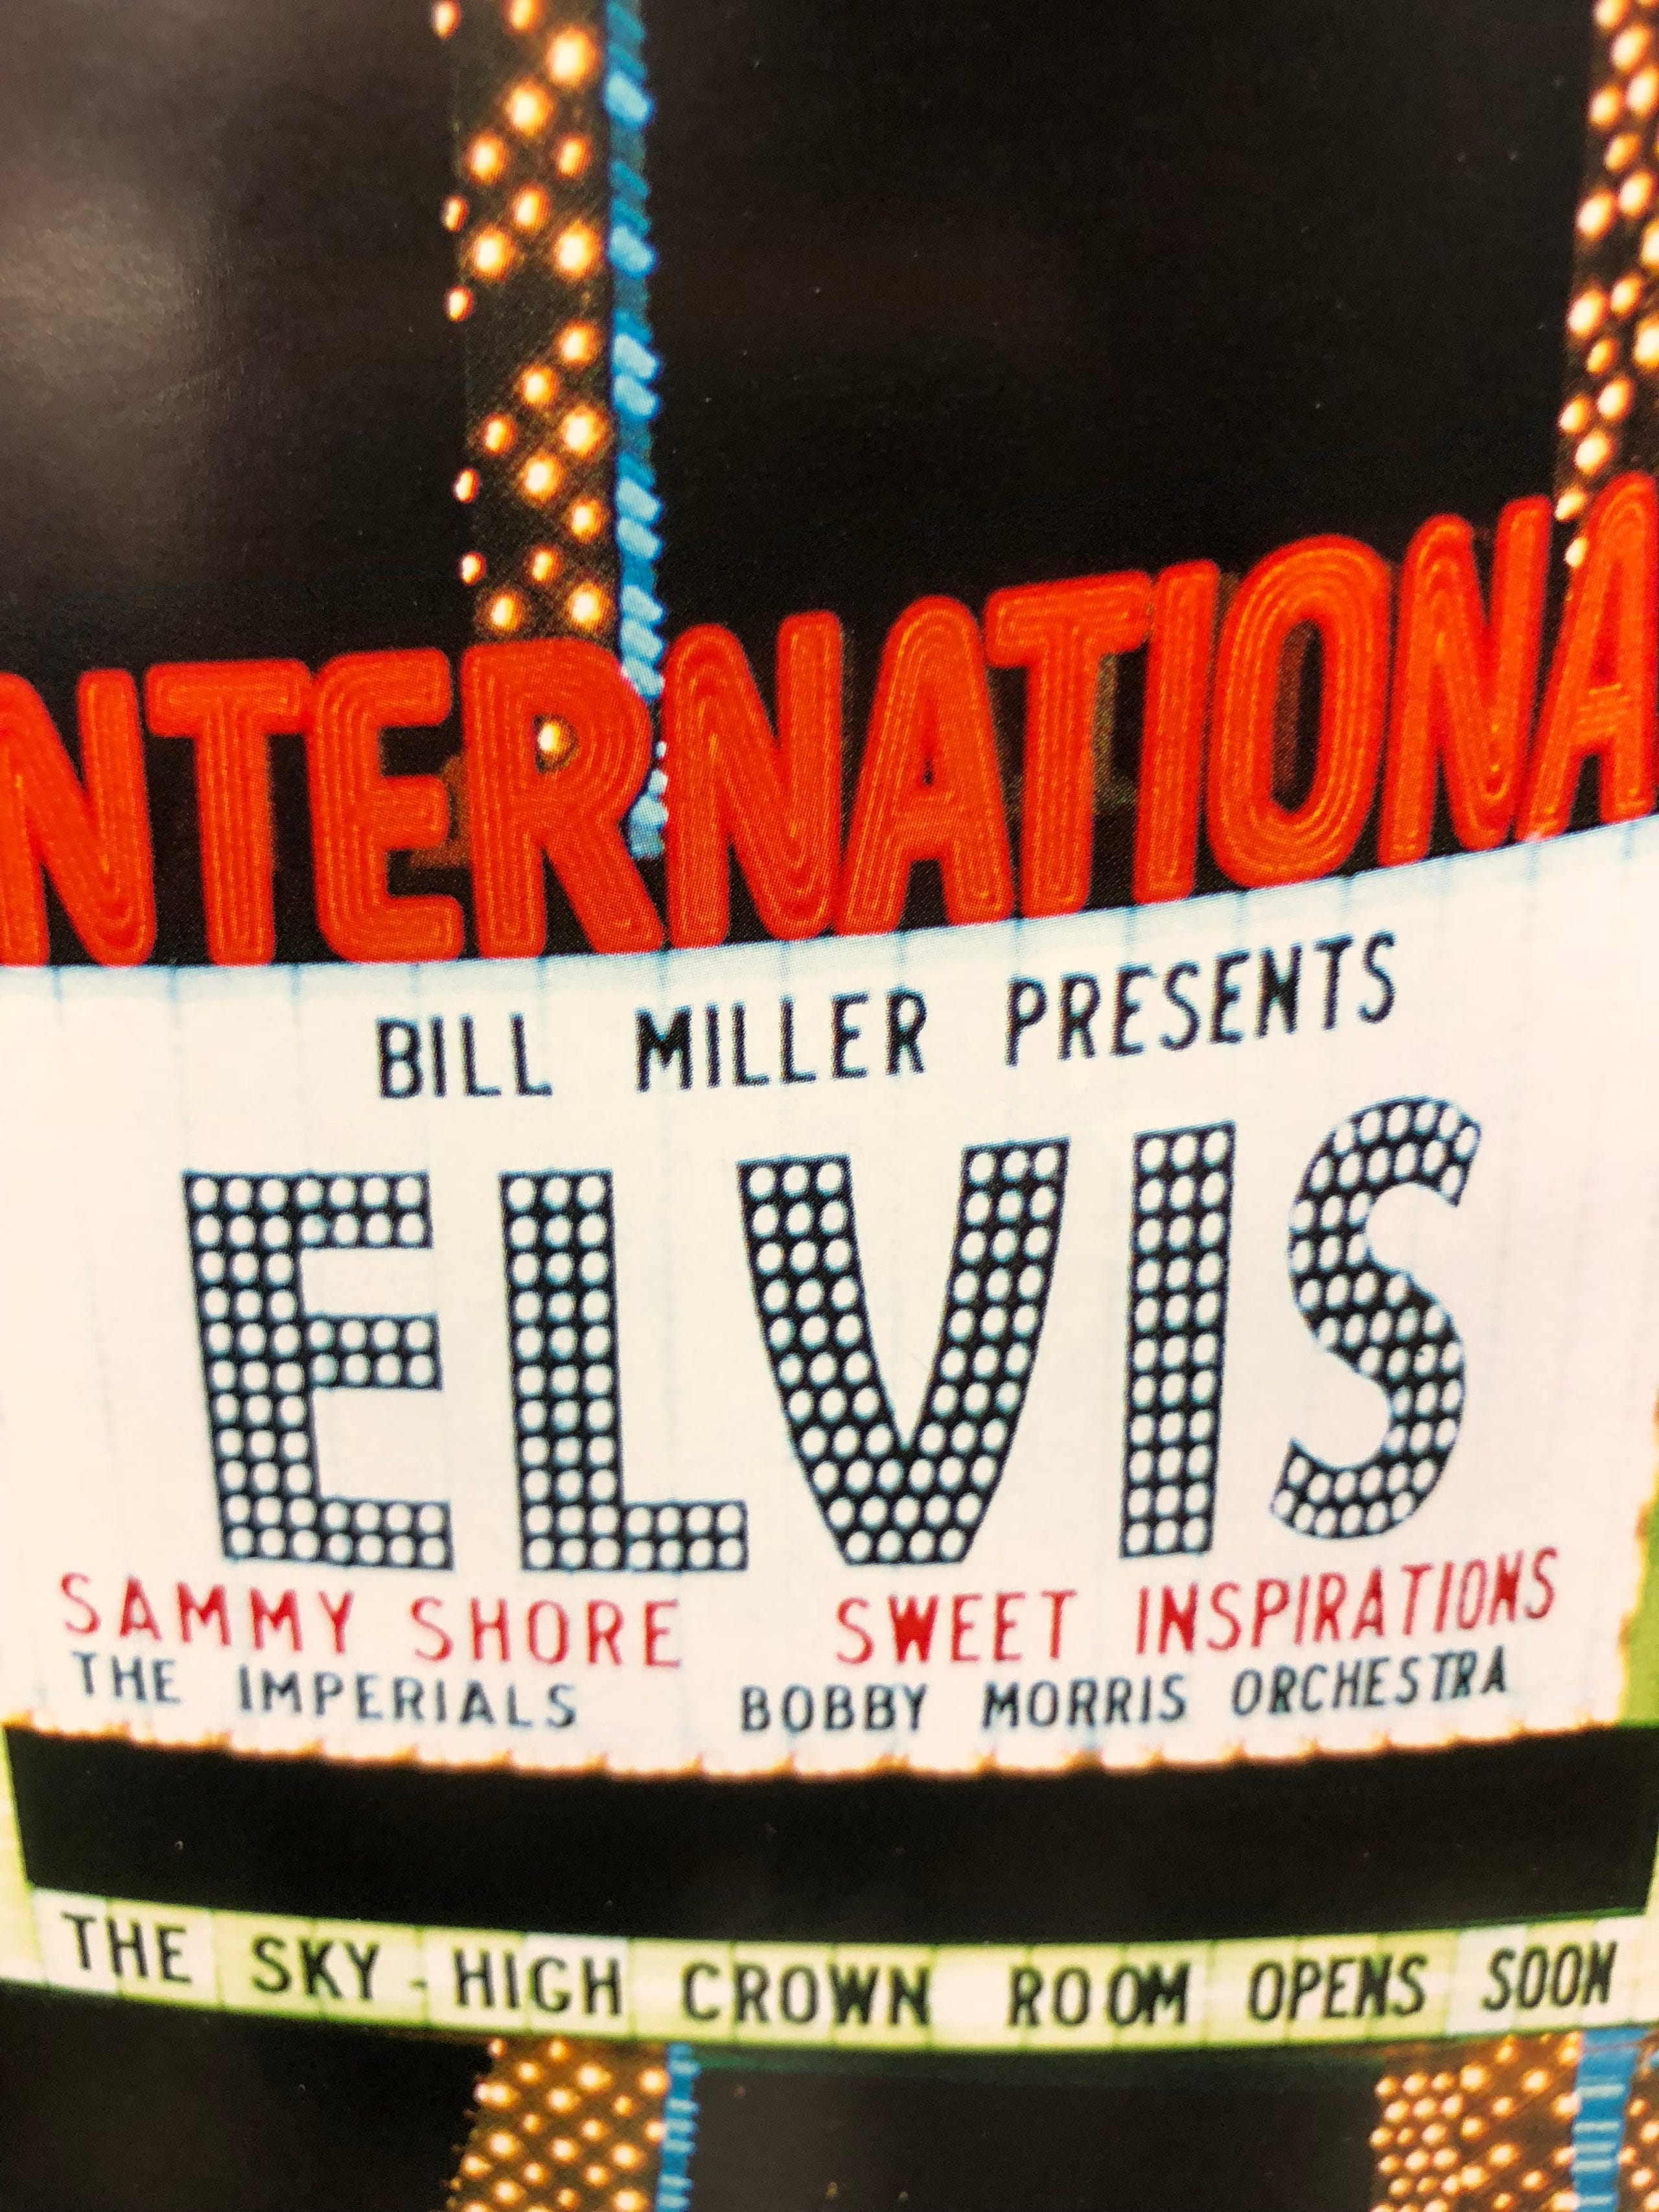 A look at the lineup for the International Hotel during Elvis' time there featuring the Bobby Morris Orchestra.